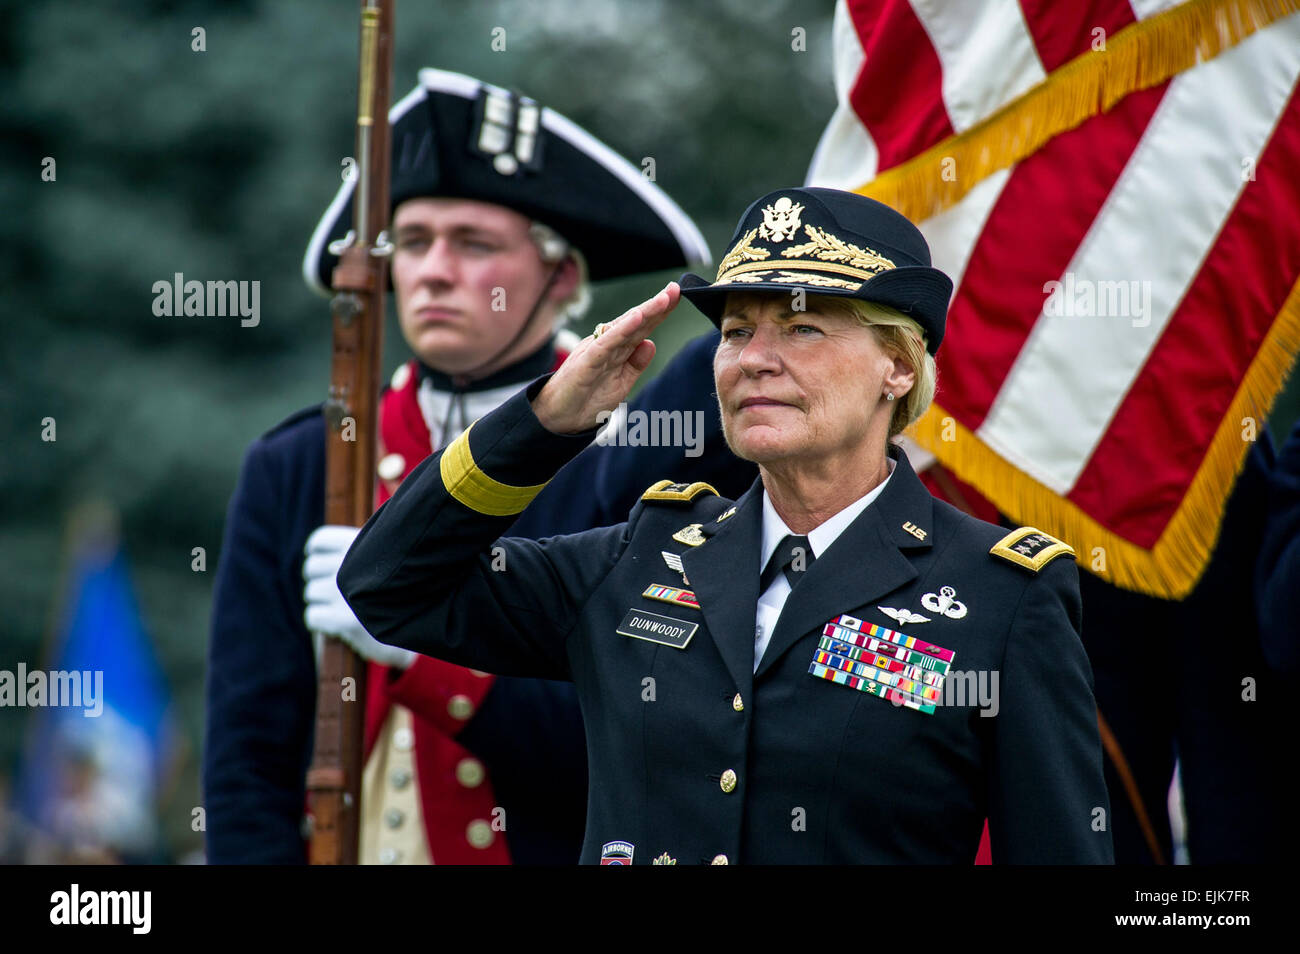 U.S. Army Gen. Ann E. Dunwoody salutes during the playing of the national anthem at her retirement ceremony on Joint Base Myer-Henderson Hall, Va., Aug. 15, 2012. Dunwoody retired after 38 years of service, becoming the first female in the U.S. Military to achieve the rank of 4-Star General.  Staff Sgt. Teddy Wade Stock Photo